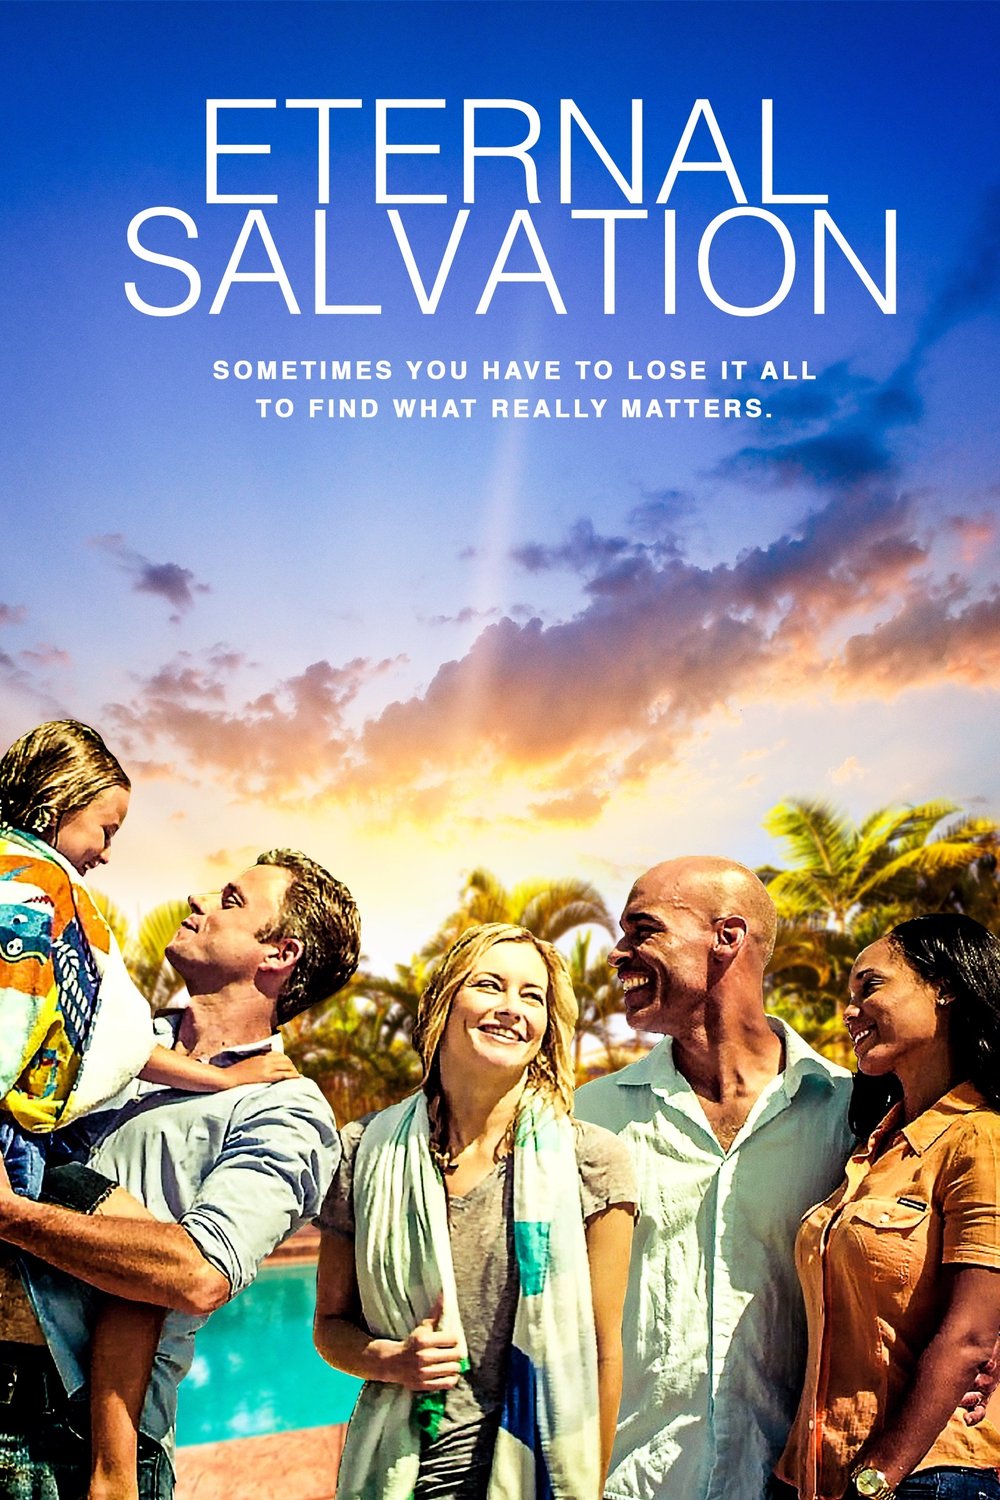 Poster of the movie Eternal Salvation